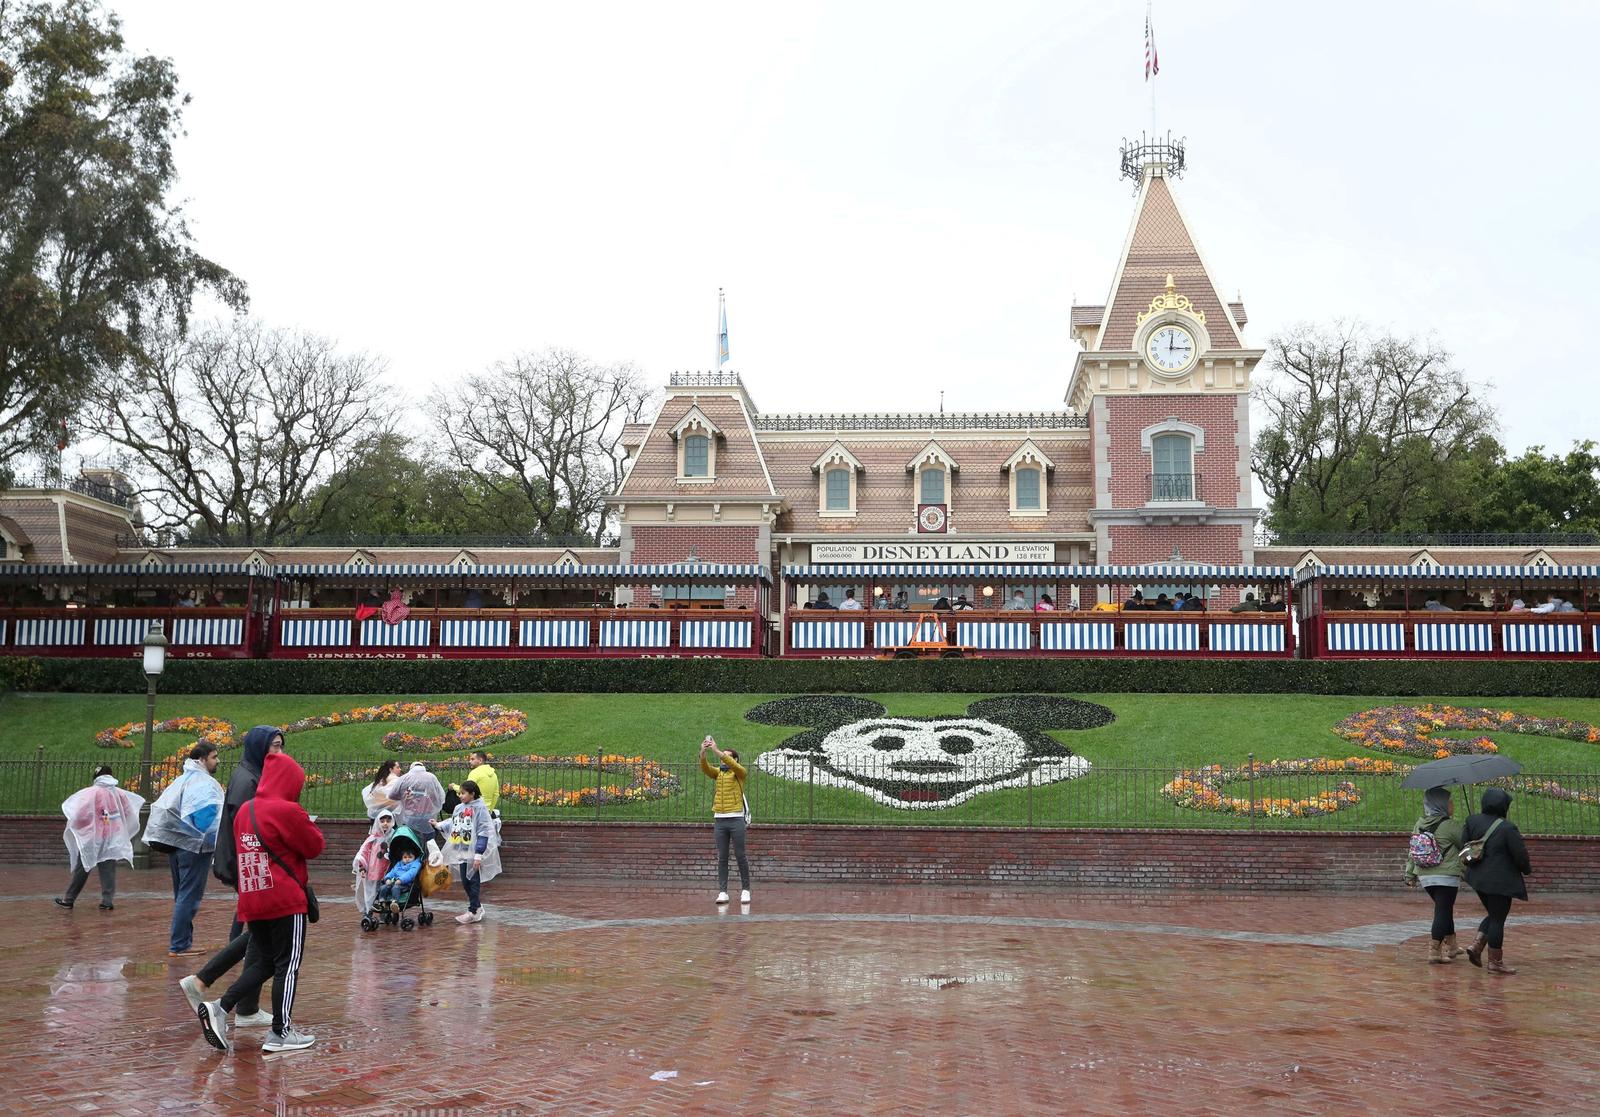 Disney to lay off about 28,000 parks unit employees due to coronavirus hit